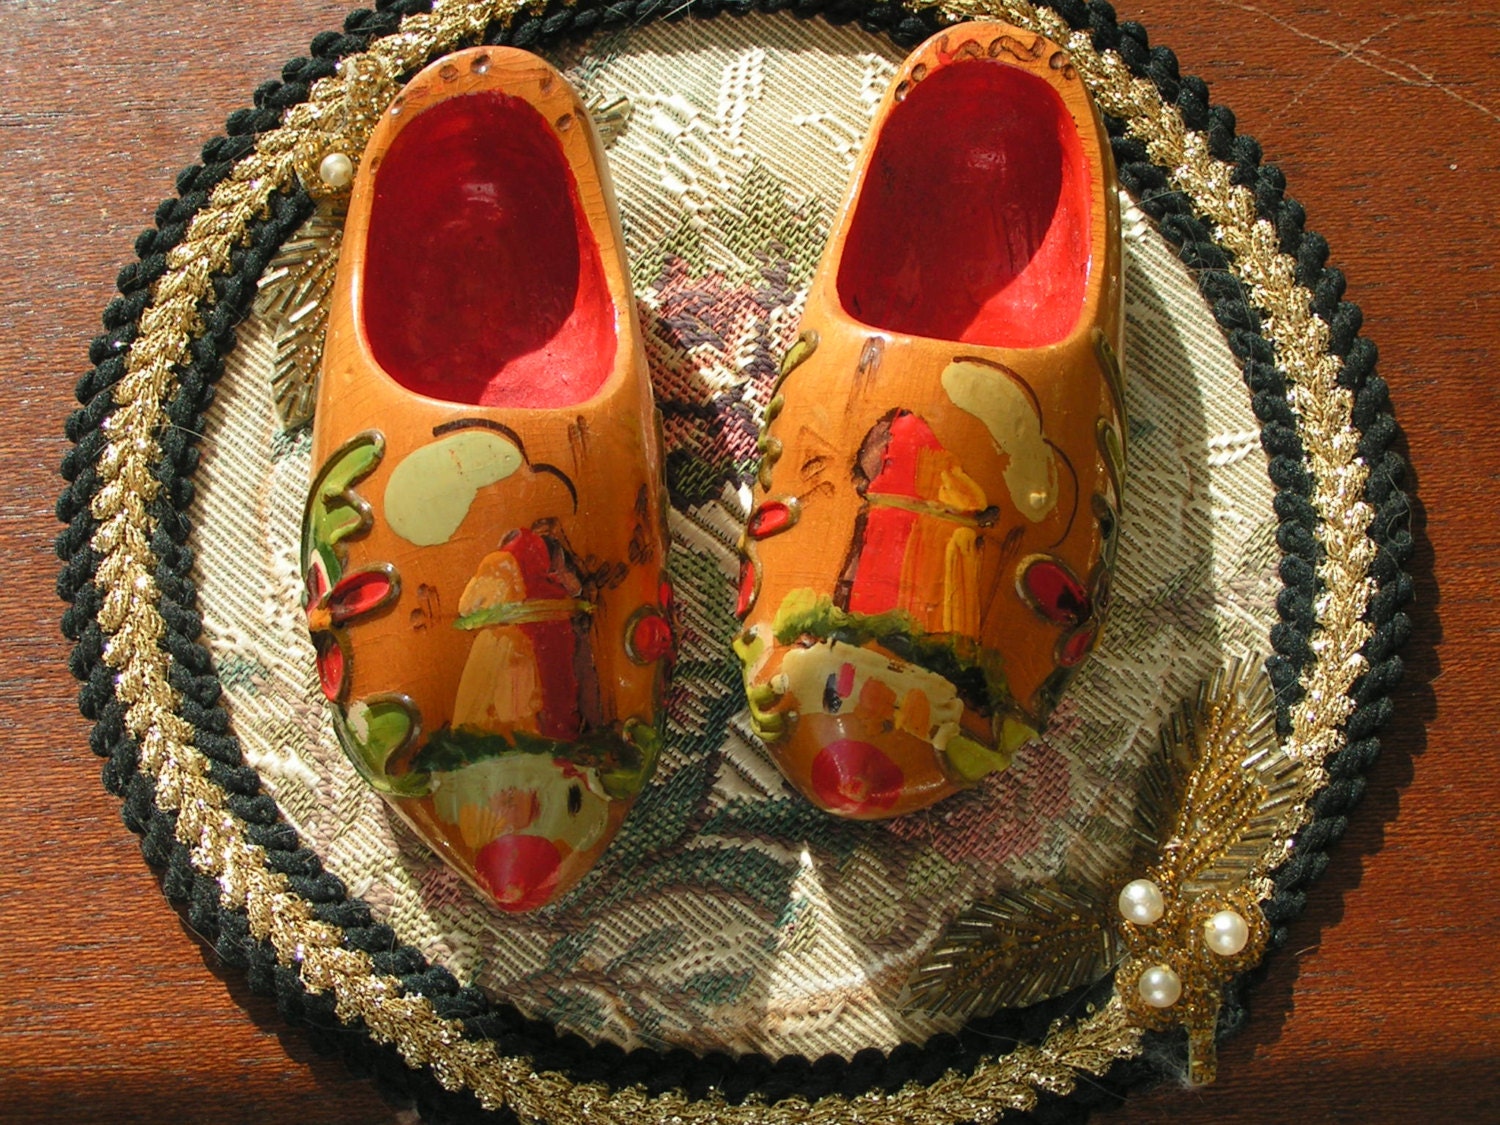 Miniature Wooden Dutch Shoes Artistically painted by LuciesLuvlies